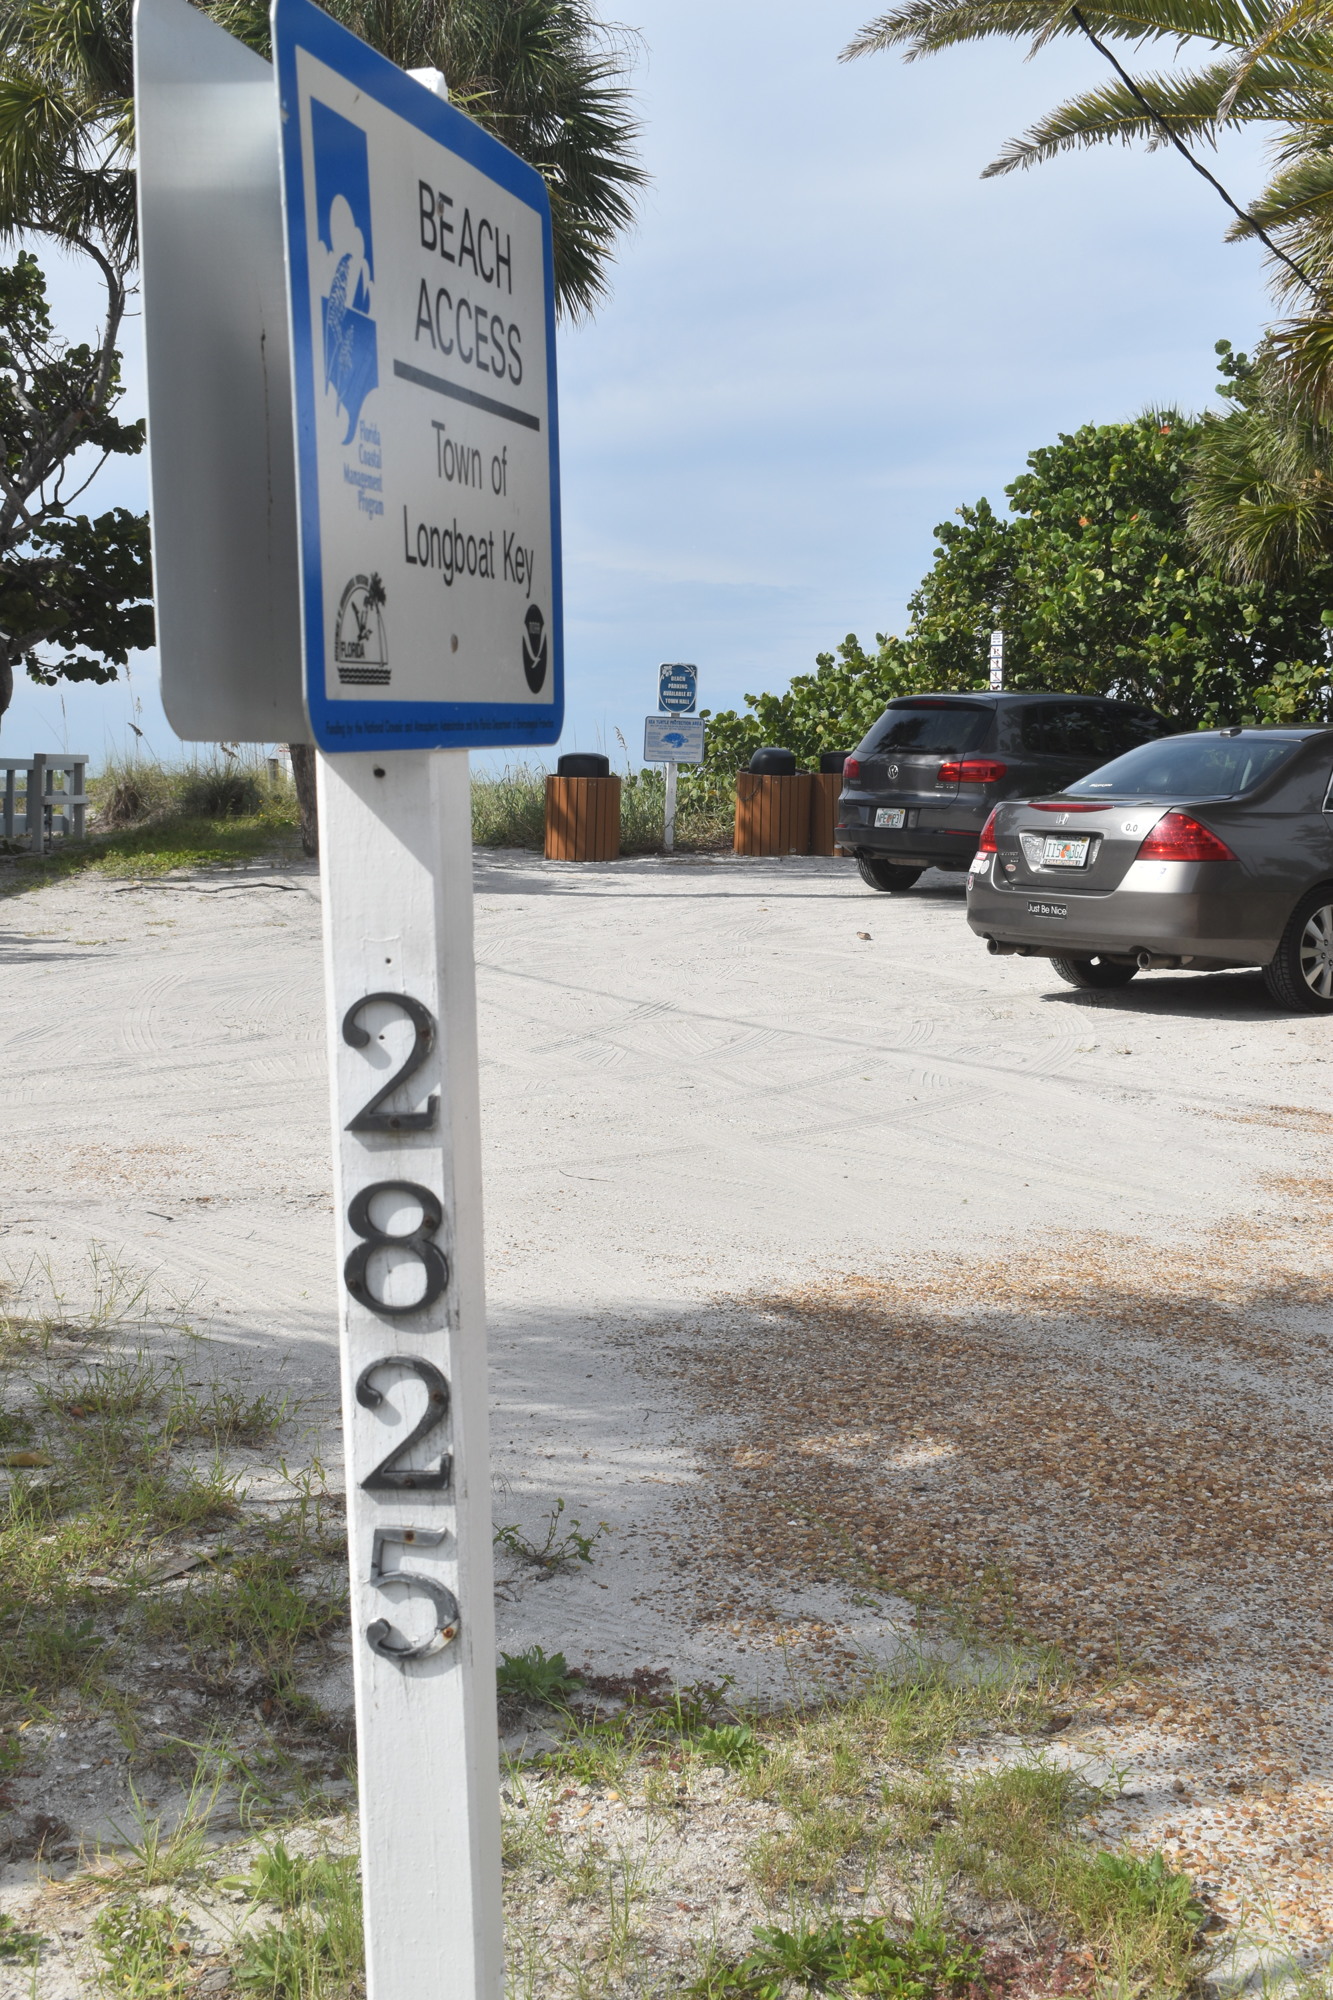 A look at the Longboat Key's public beach parking on Friday at 2825 Gulf of Mexico Drive. The town has 12 public beach access points.